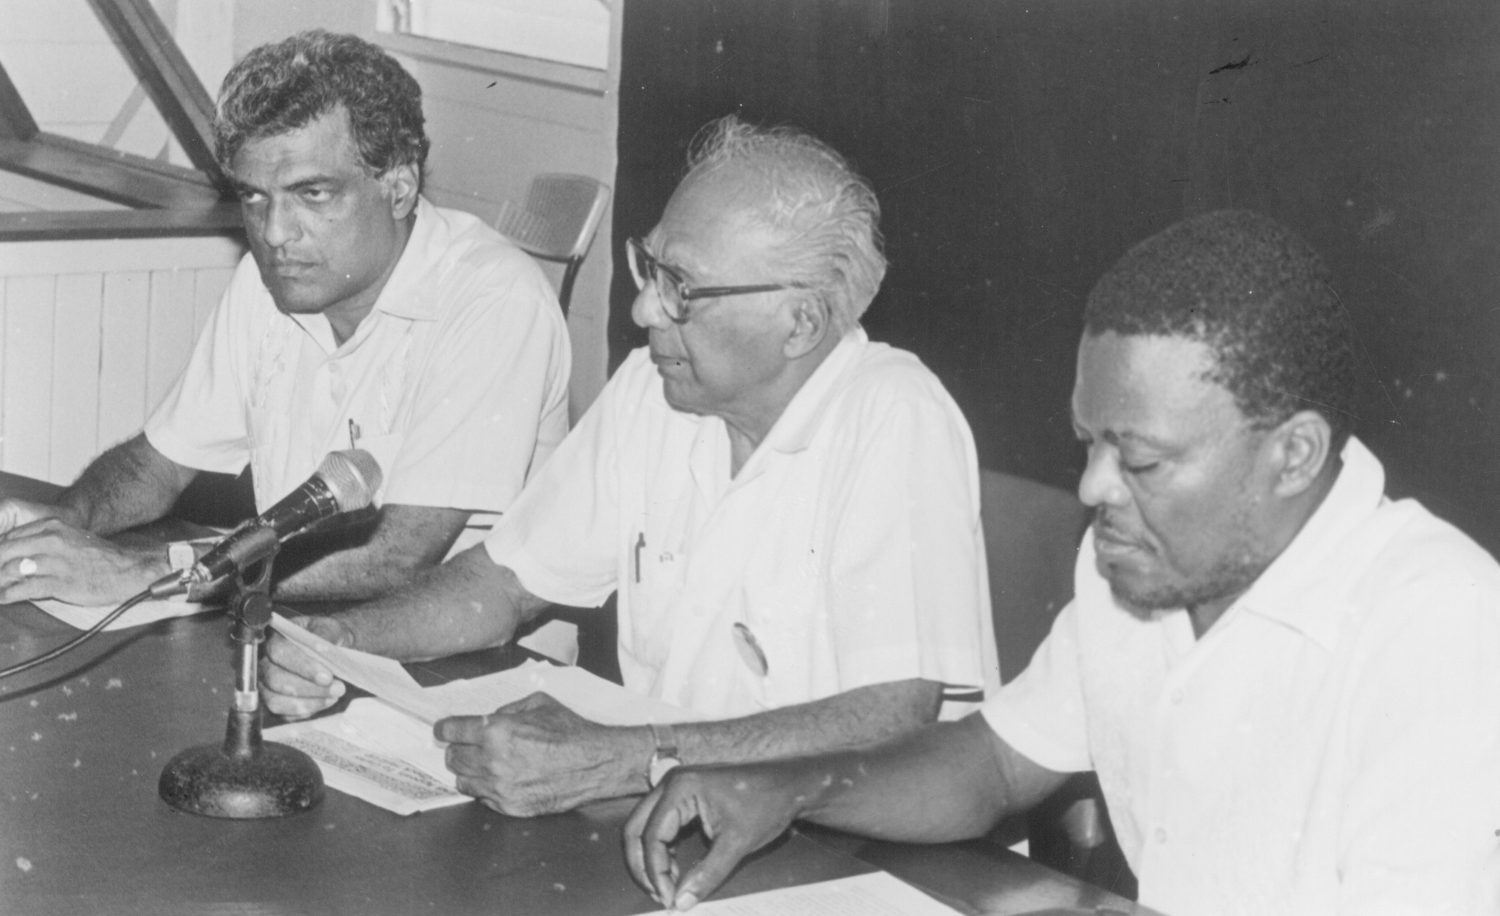 Cheddi Jagan with Reepu Daman Persaud (left) and Prime Ministerial candidate Samuel Hinds, at a press conference prior to the election, 1992